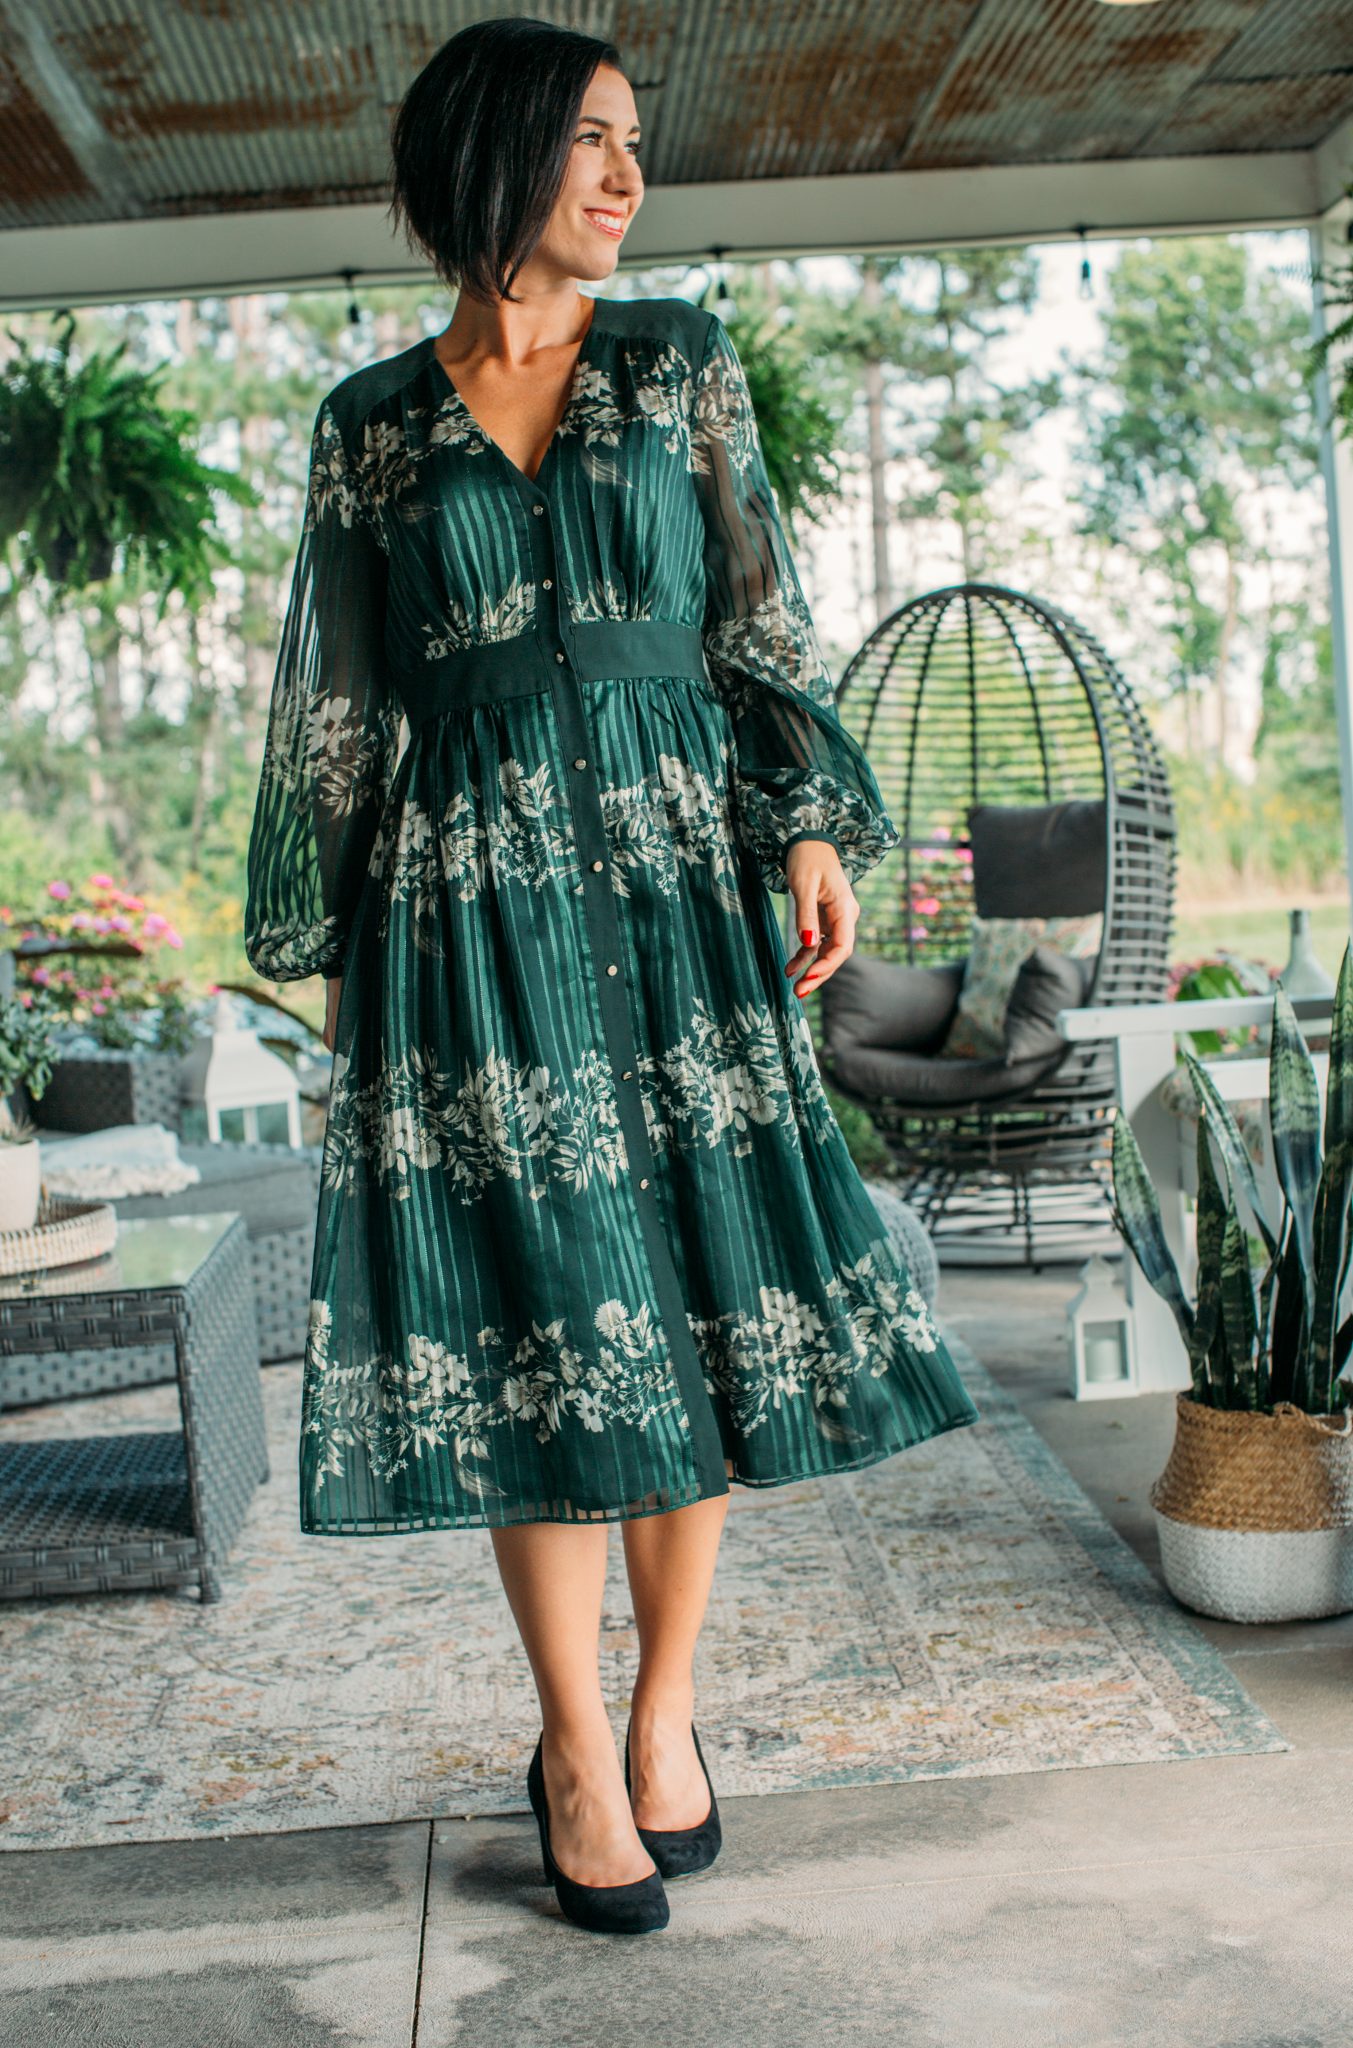 A woman poses for the camera wearing a knee-length green silk dress with a white floral pattern. The dress has a pleated texture and has long, flowing sleeves.